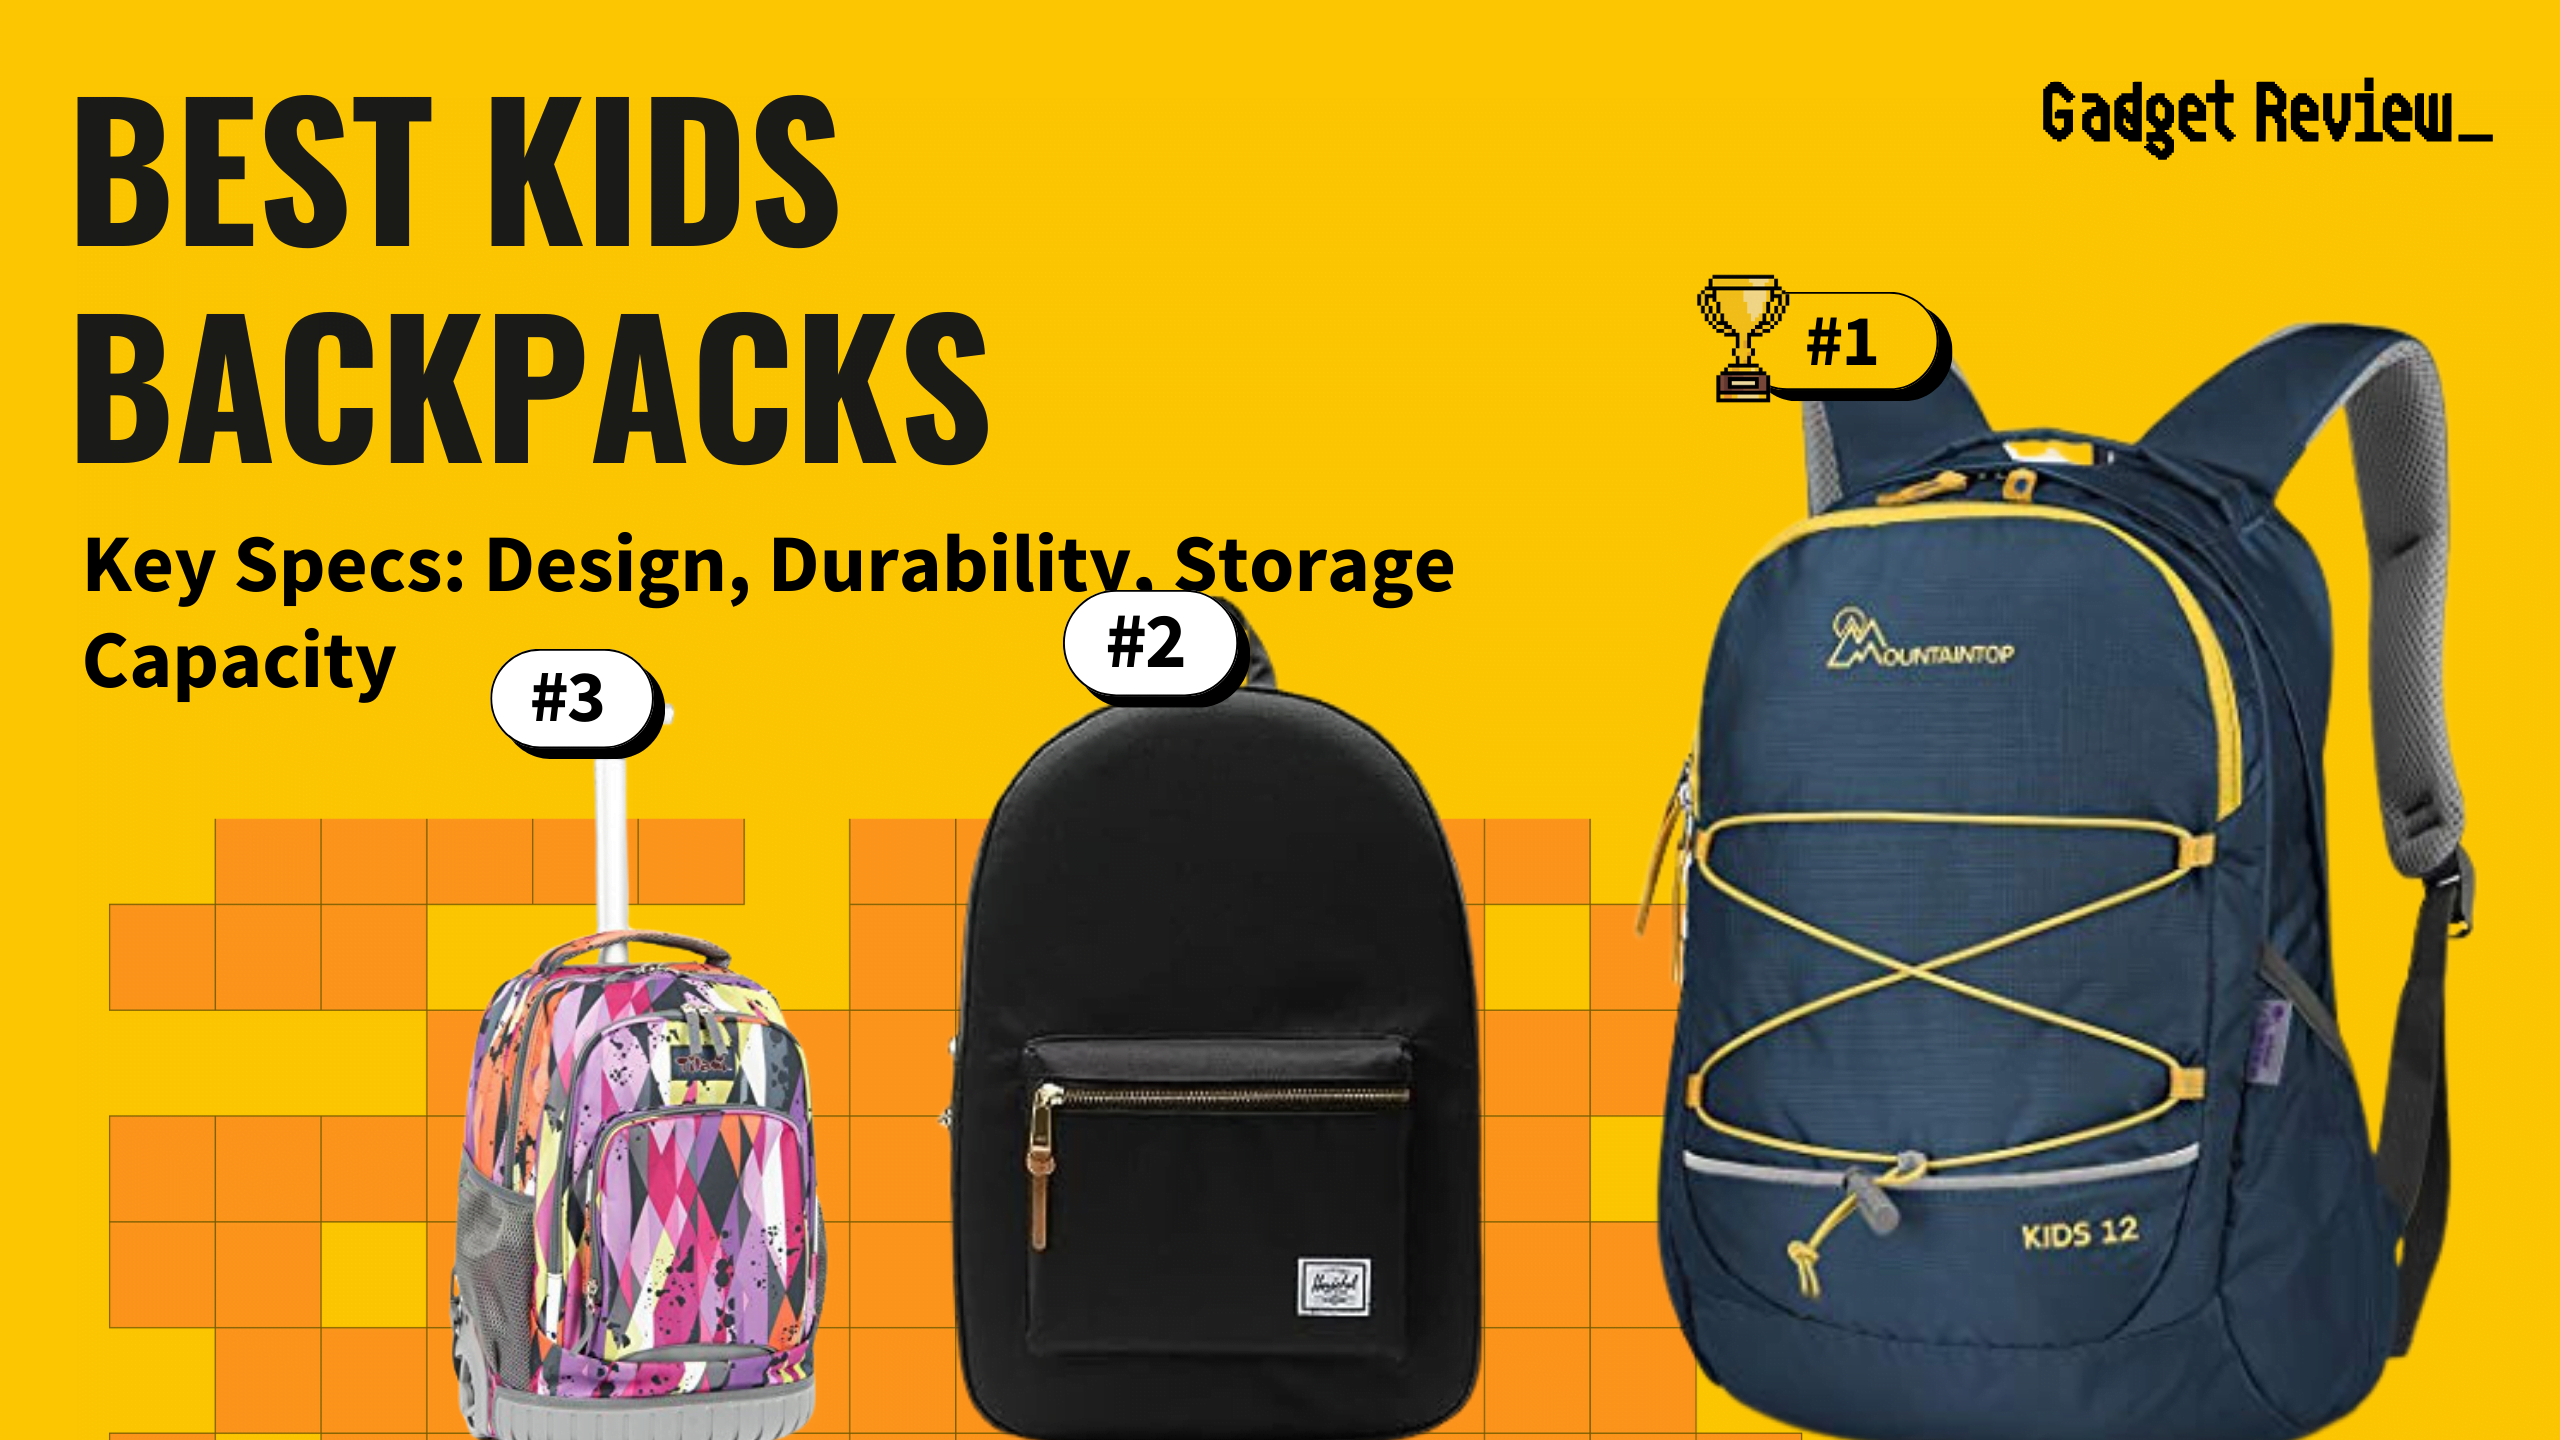 Best Kids Backpacks for All Kids - arinsolangeathome